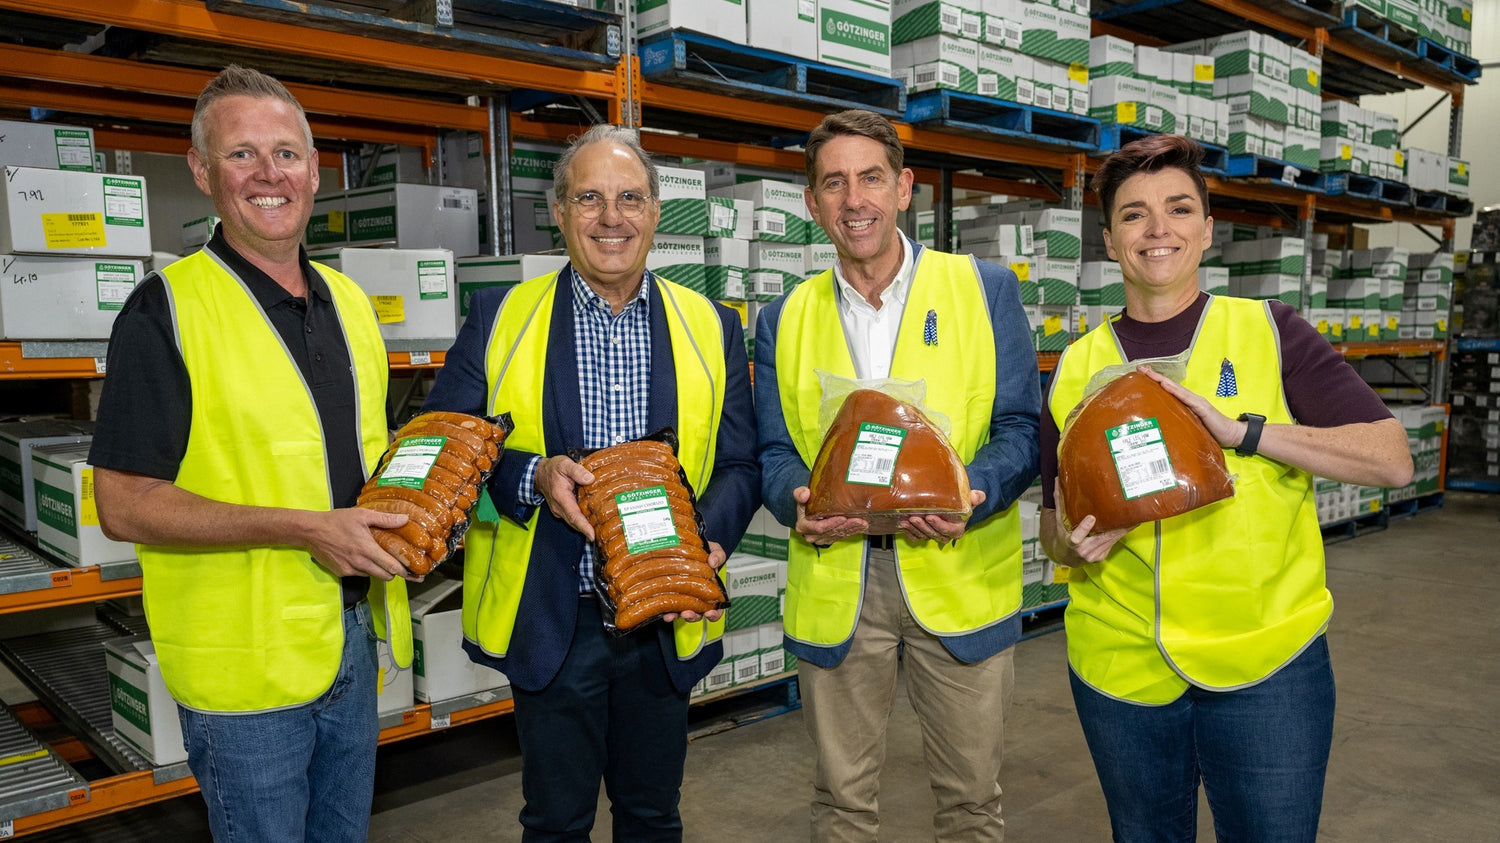 Cameron Dick MP and Melissa McMahon MP for Macalister Opens Factory